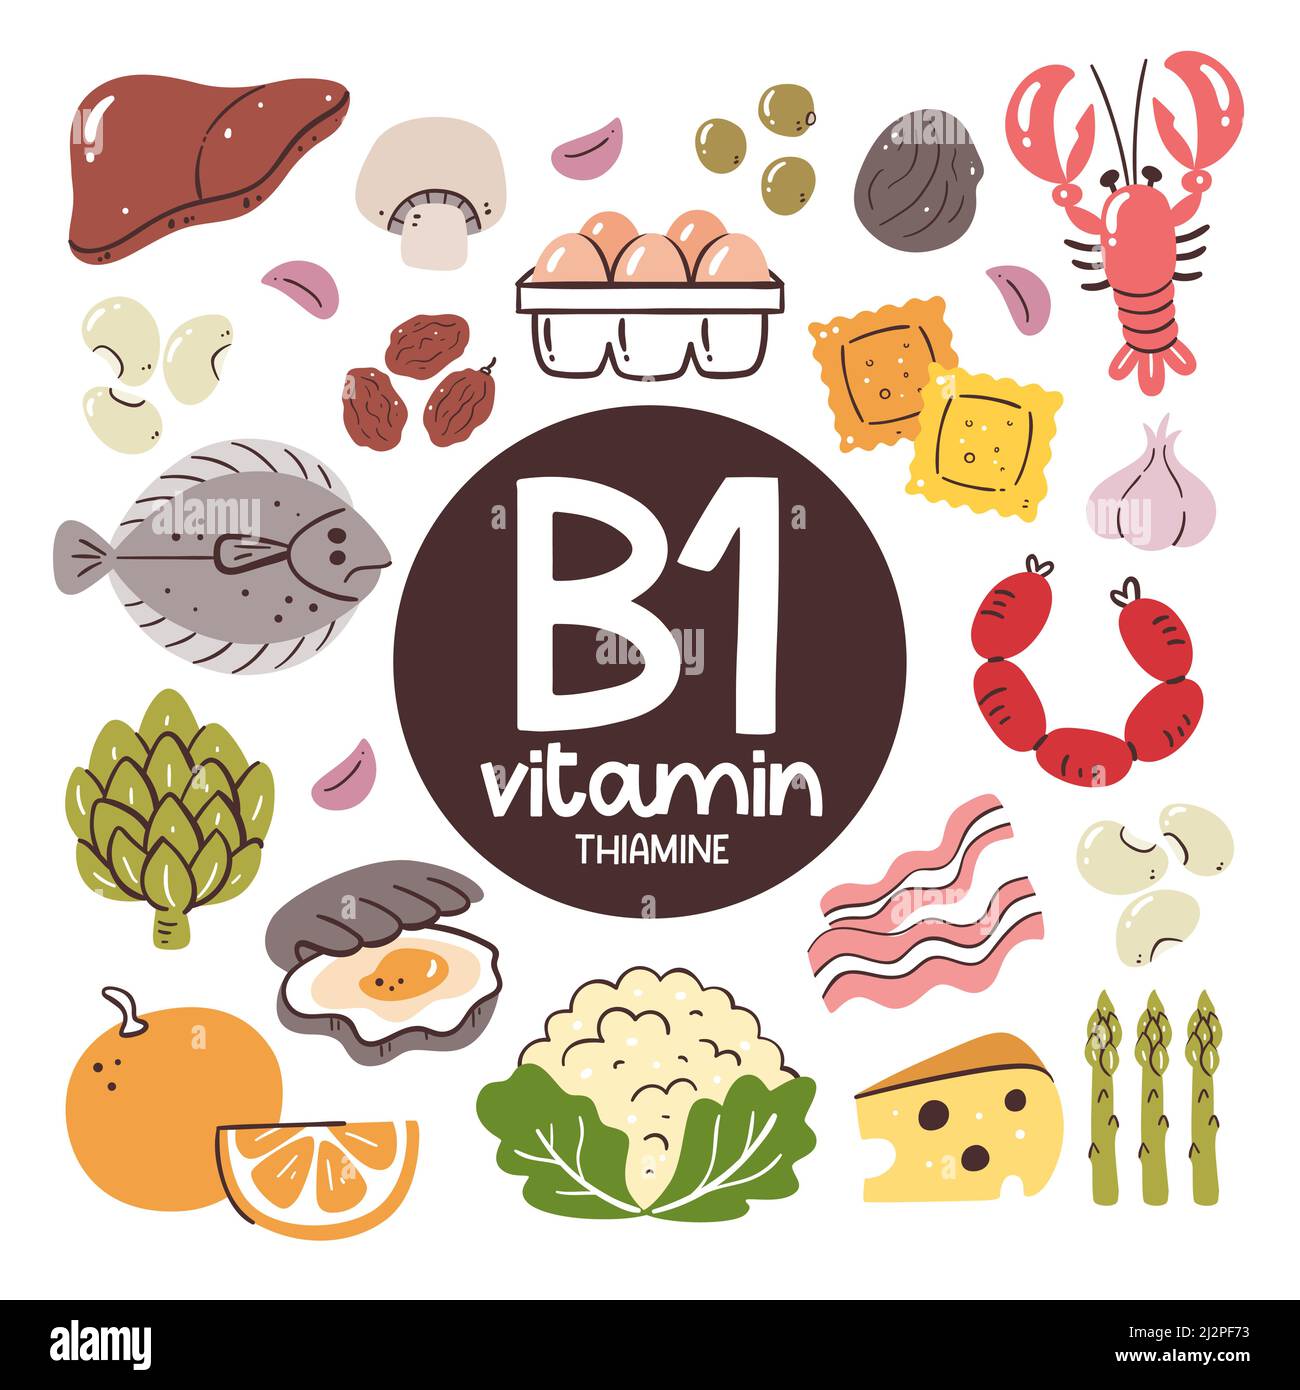 Food products with high level of Vitamin B1 (Thiamine). Cooking ingredients. Fruits, vegetables, legumes, dairy, seafood, meat products. Stock Vector